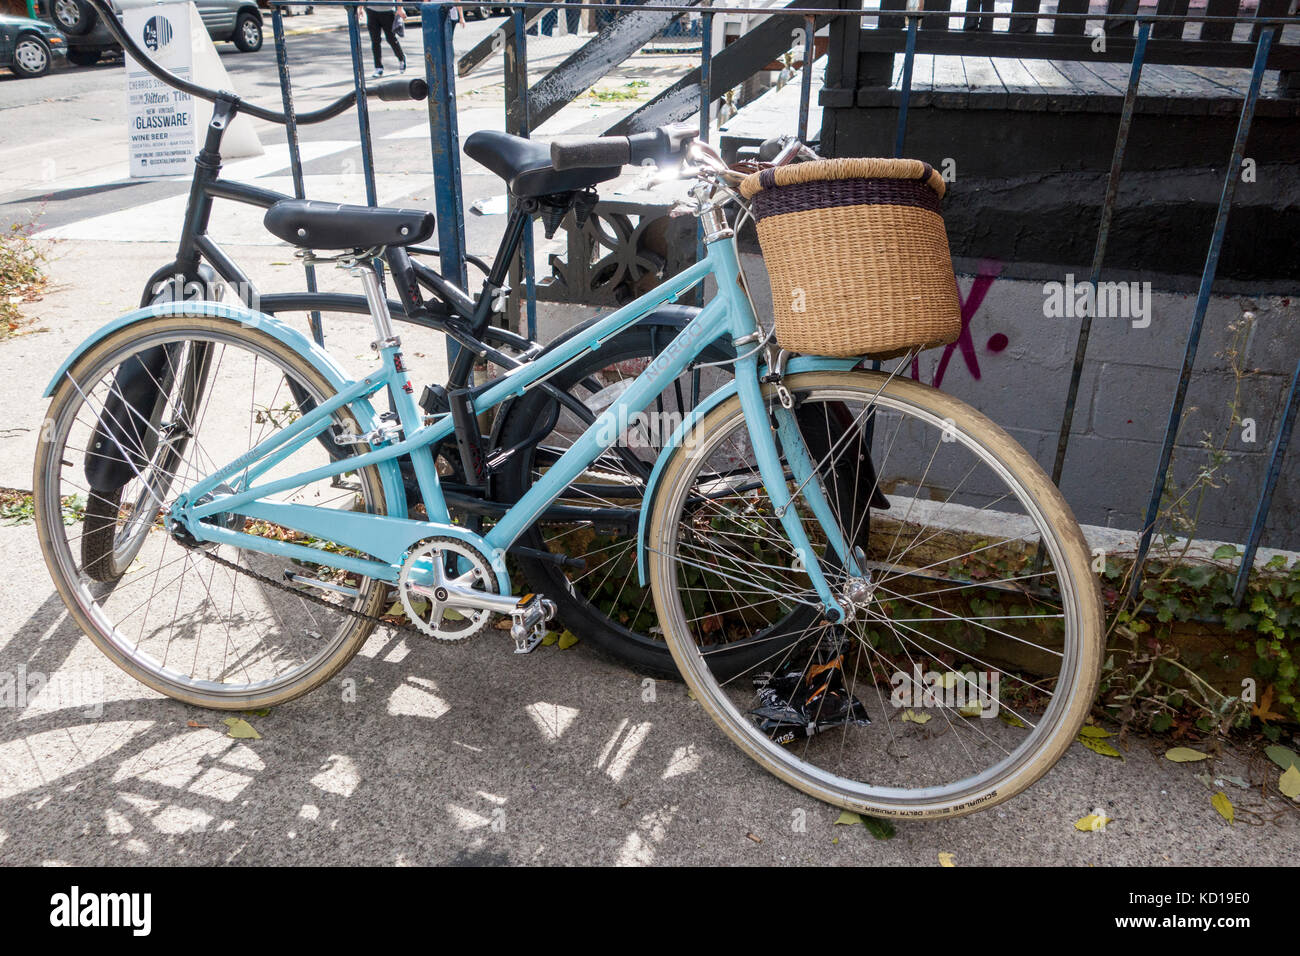 Woman's bicycle with basket locked to fence and another bicycle in Kensington Market in downtown Toronto Ontario Canada Stock Photo